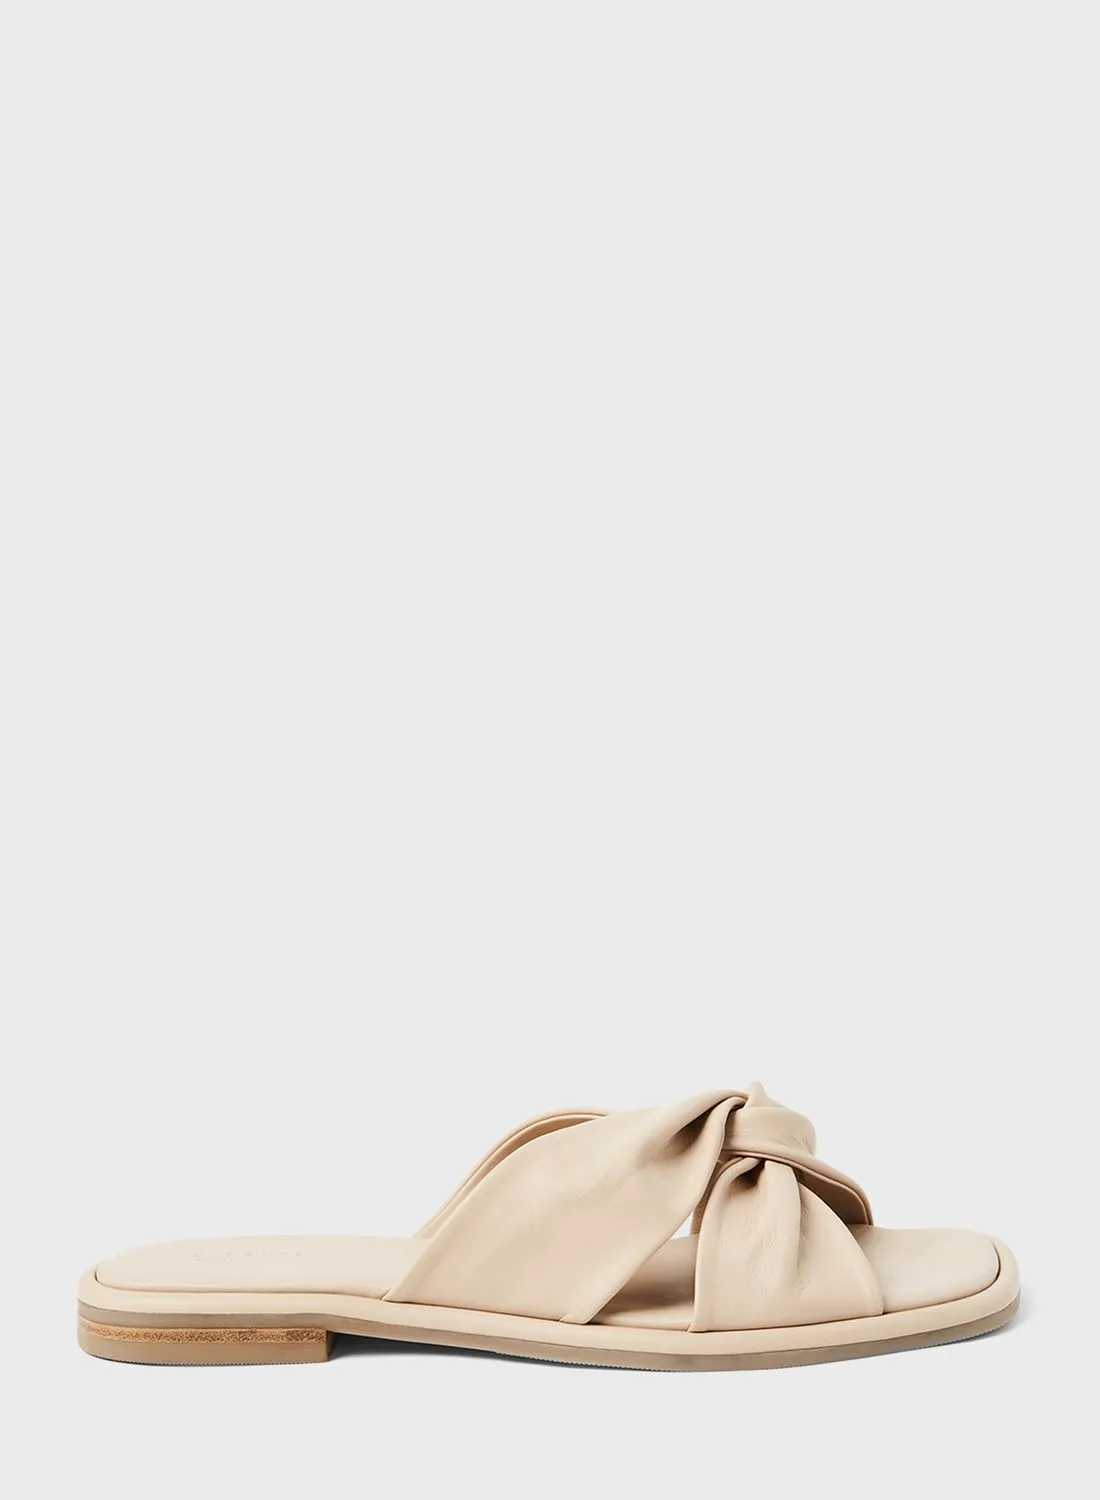 Ted Baker Knotted Leather Sandals